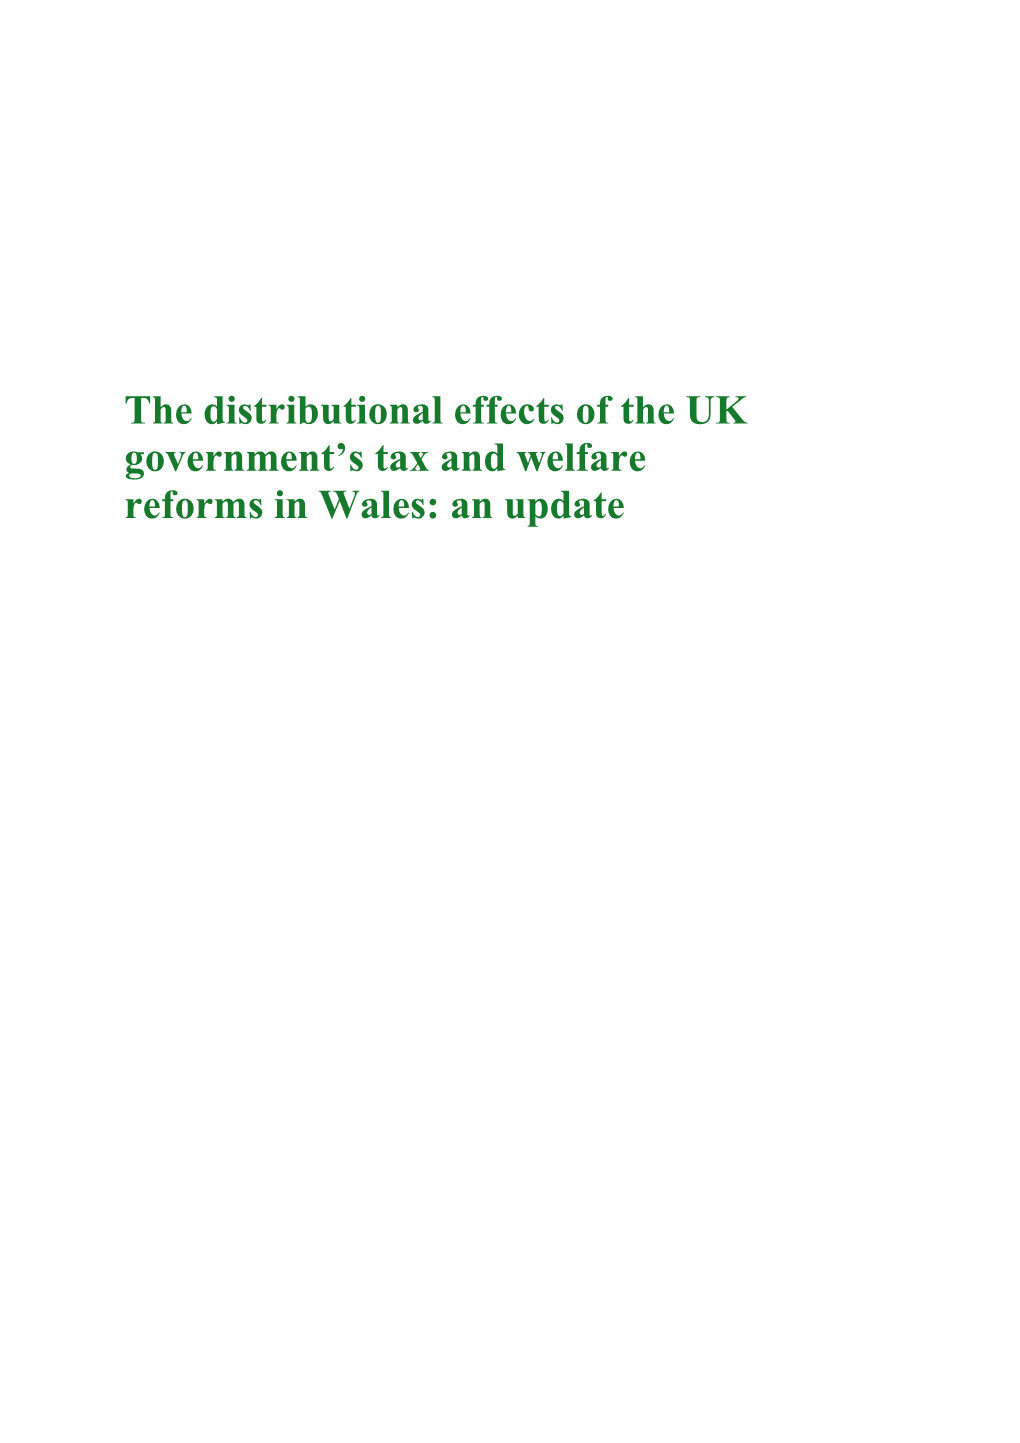 The Distributional Effects of the UK Government S Tax and Welfare Reforms in Wales: an Update